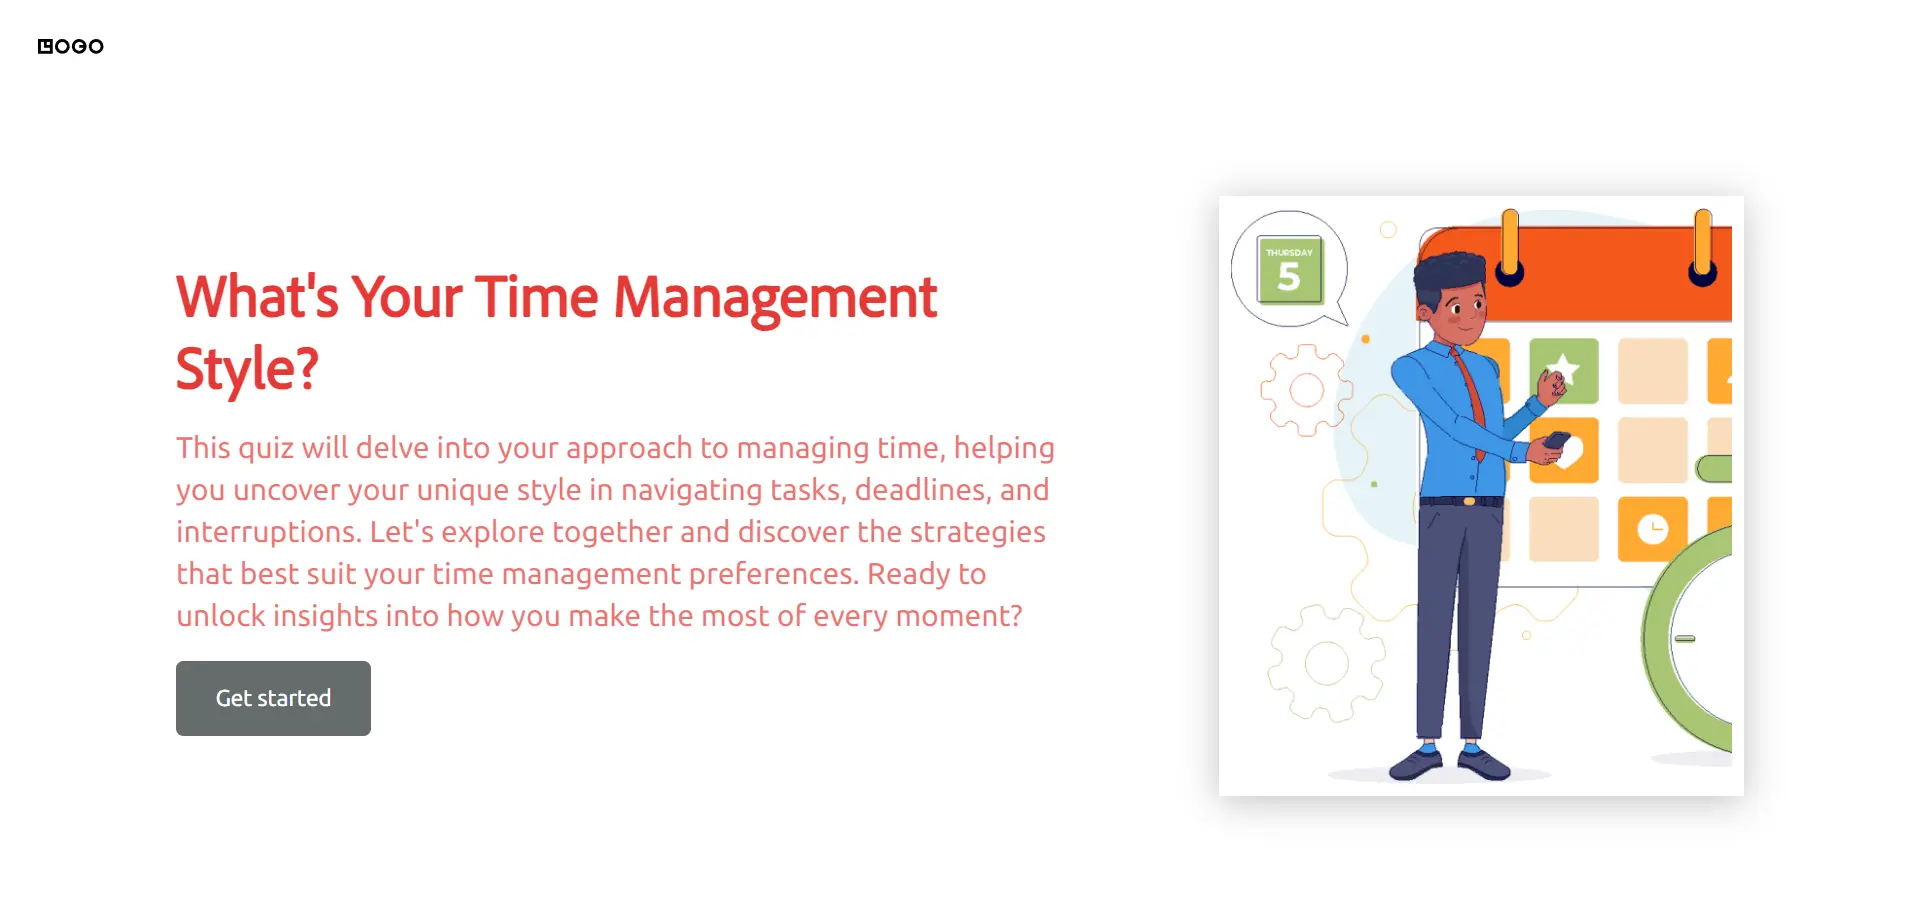 What's Your Time Management Style (1)